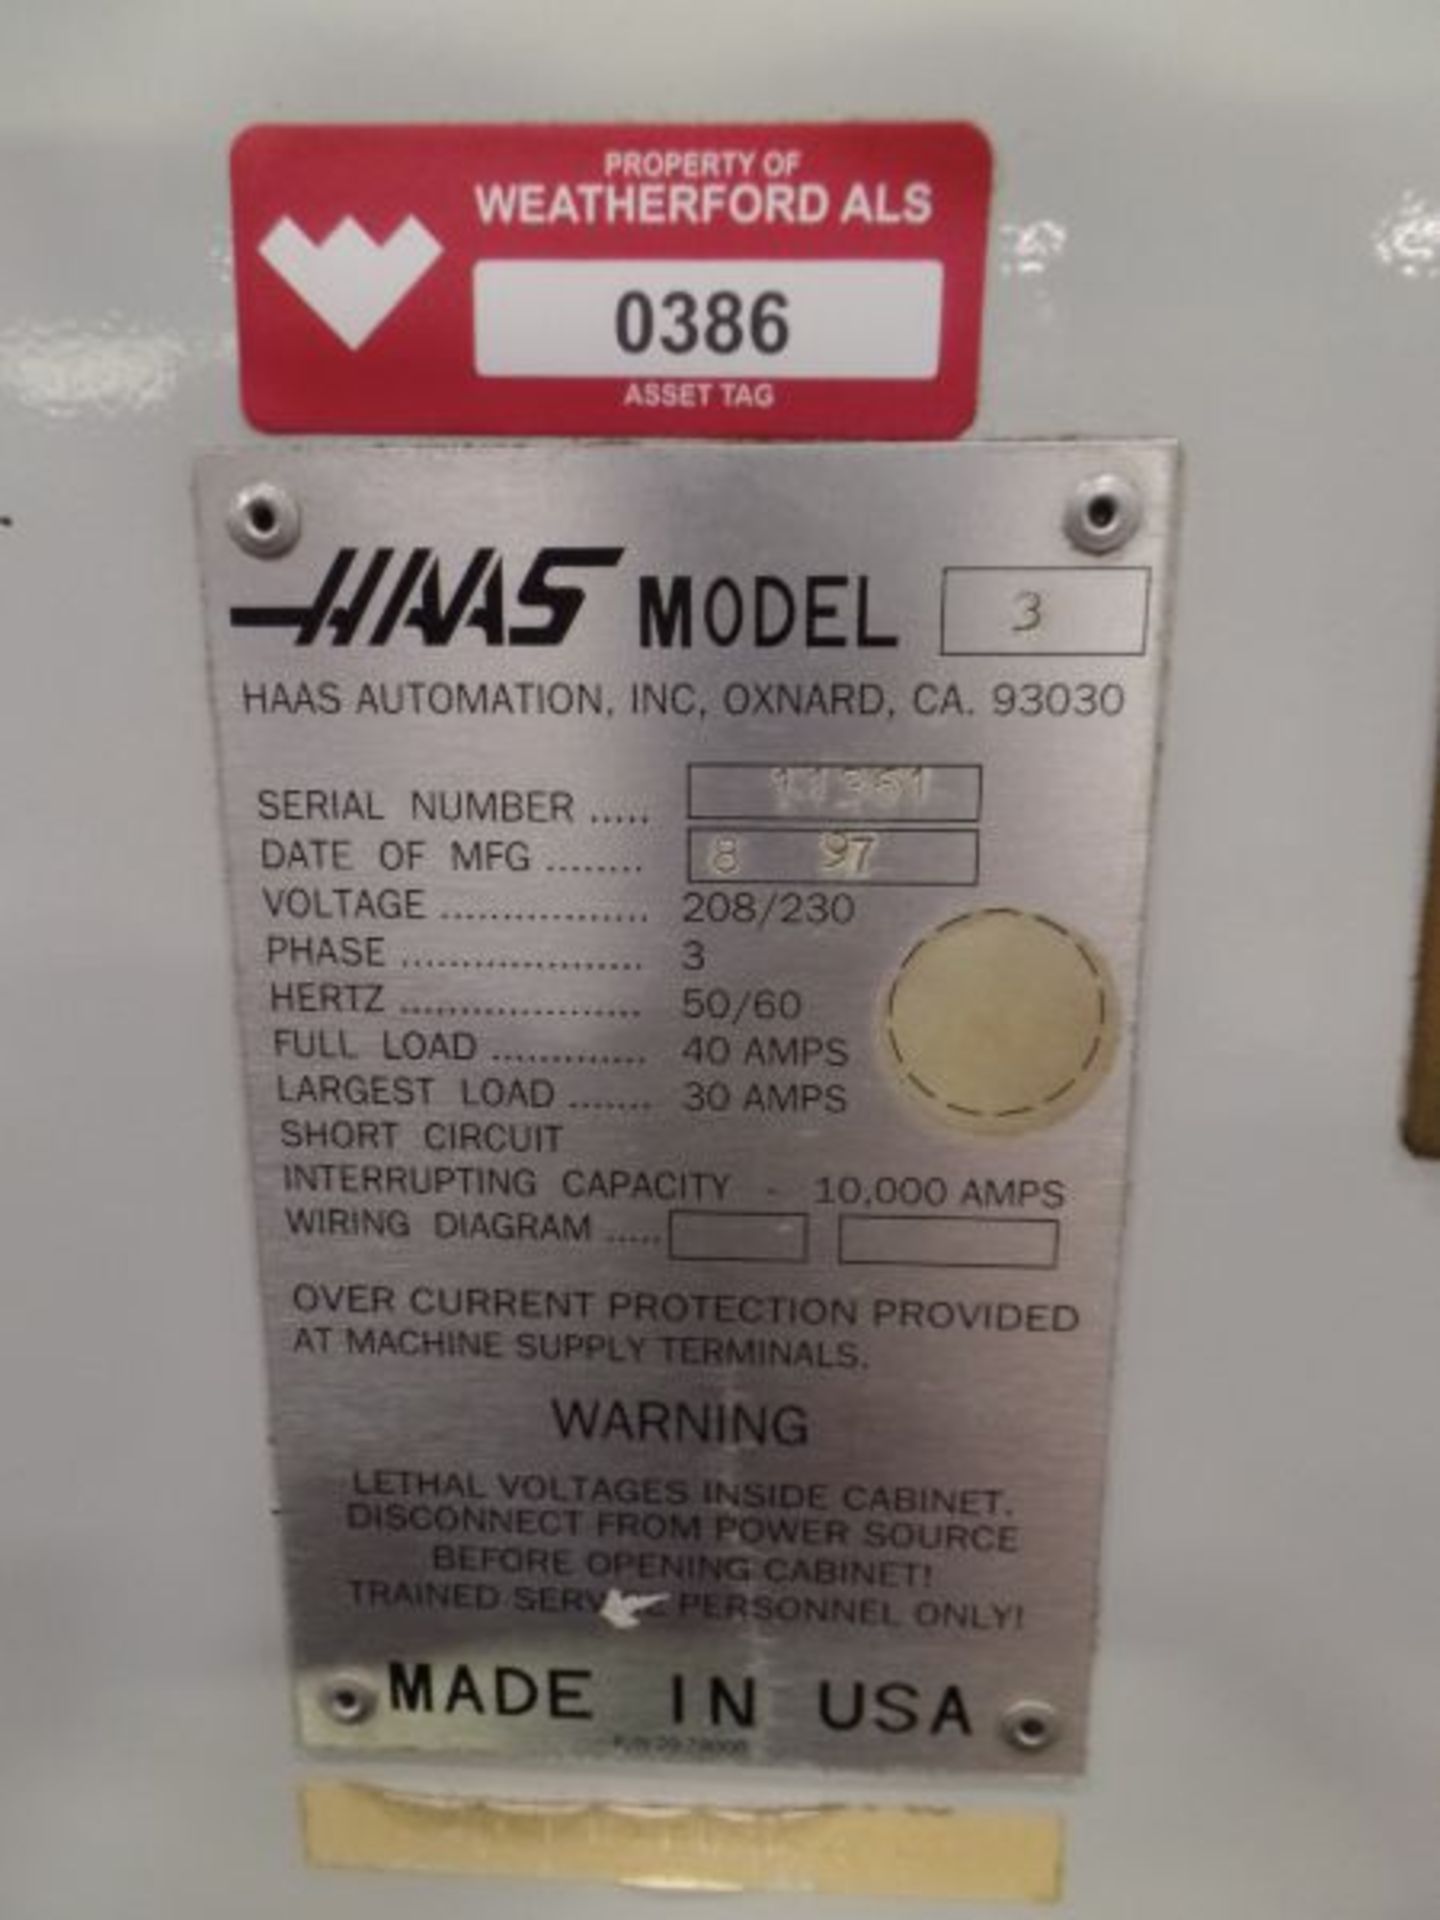 Haas VF-3, Retro’d control, 40”x 20”x 20” Travels, CT40, New 1997 *Indexer Sold Separate* - Image 7 of 7